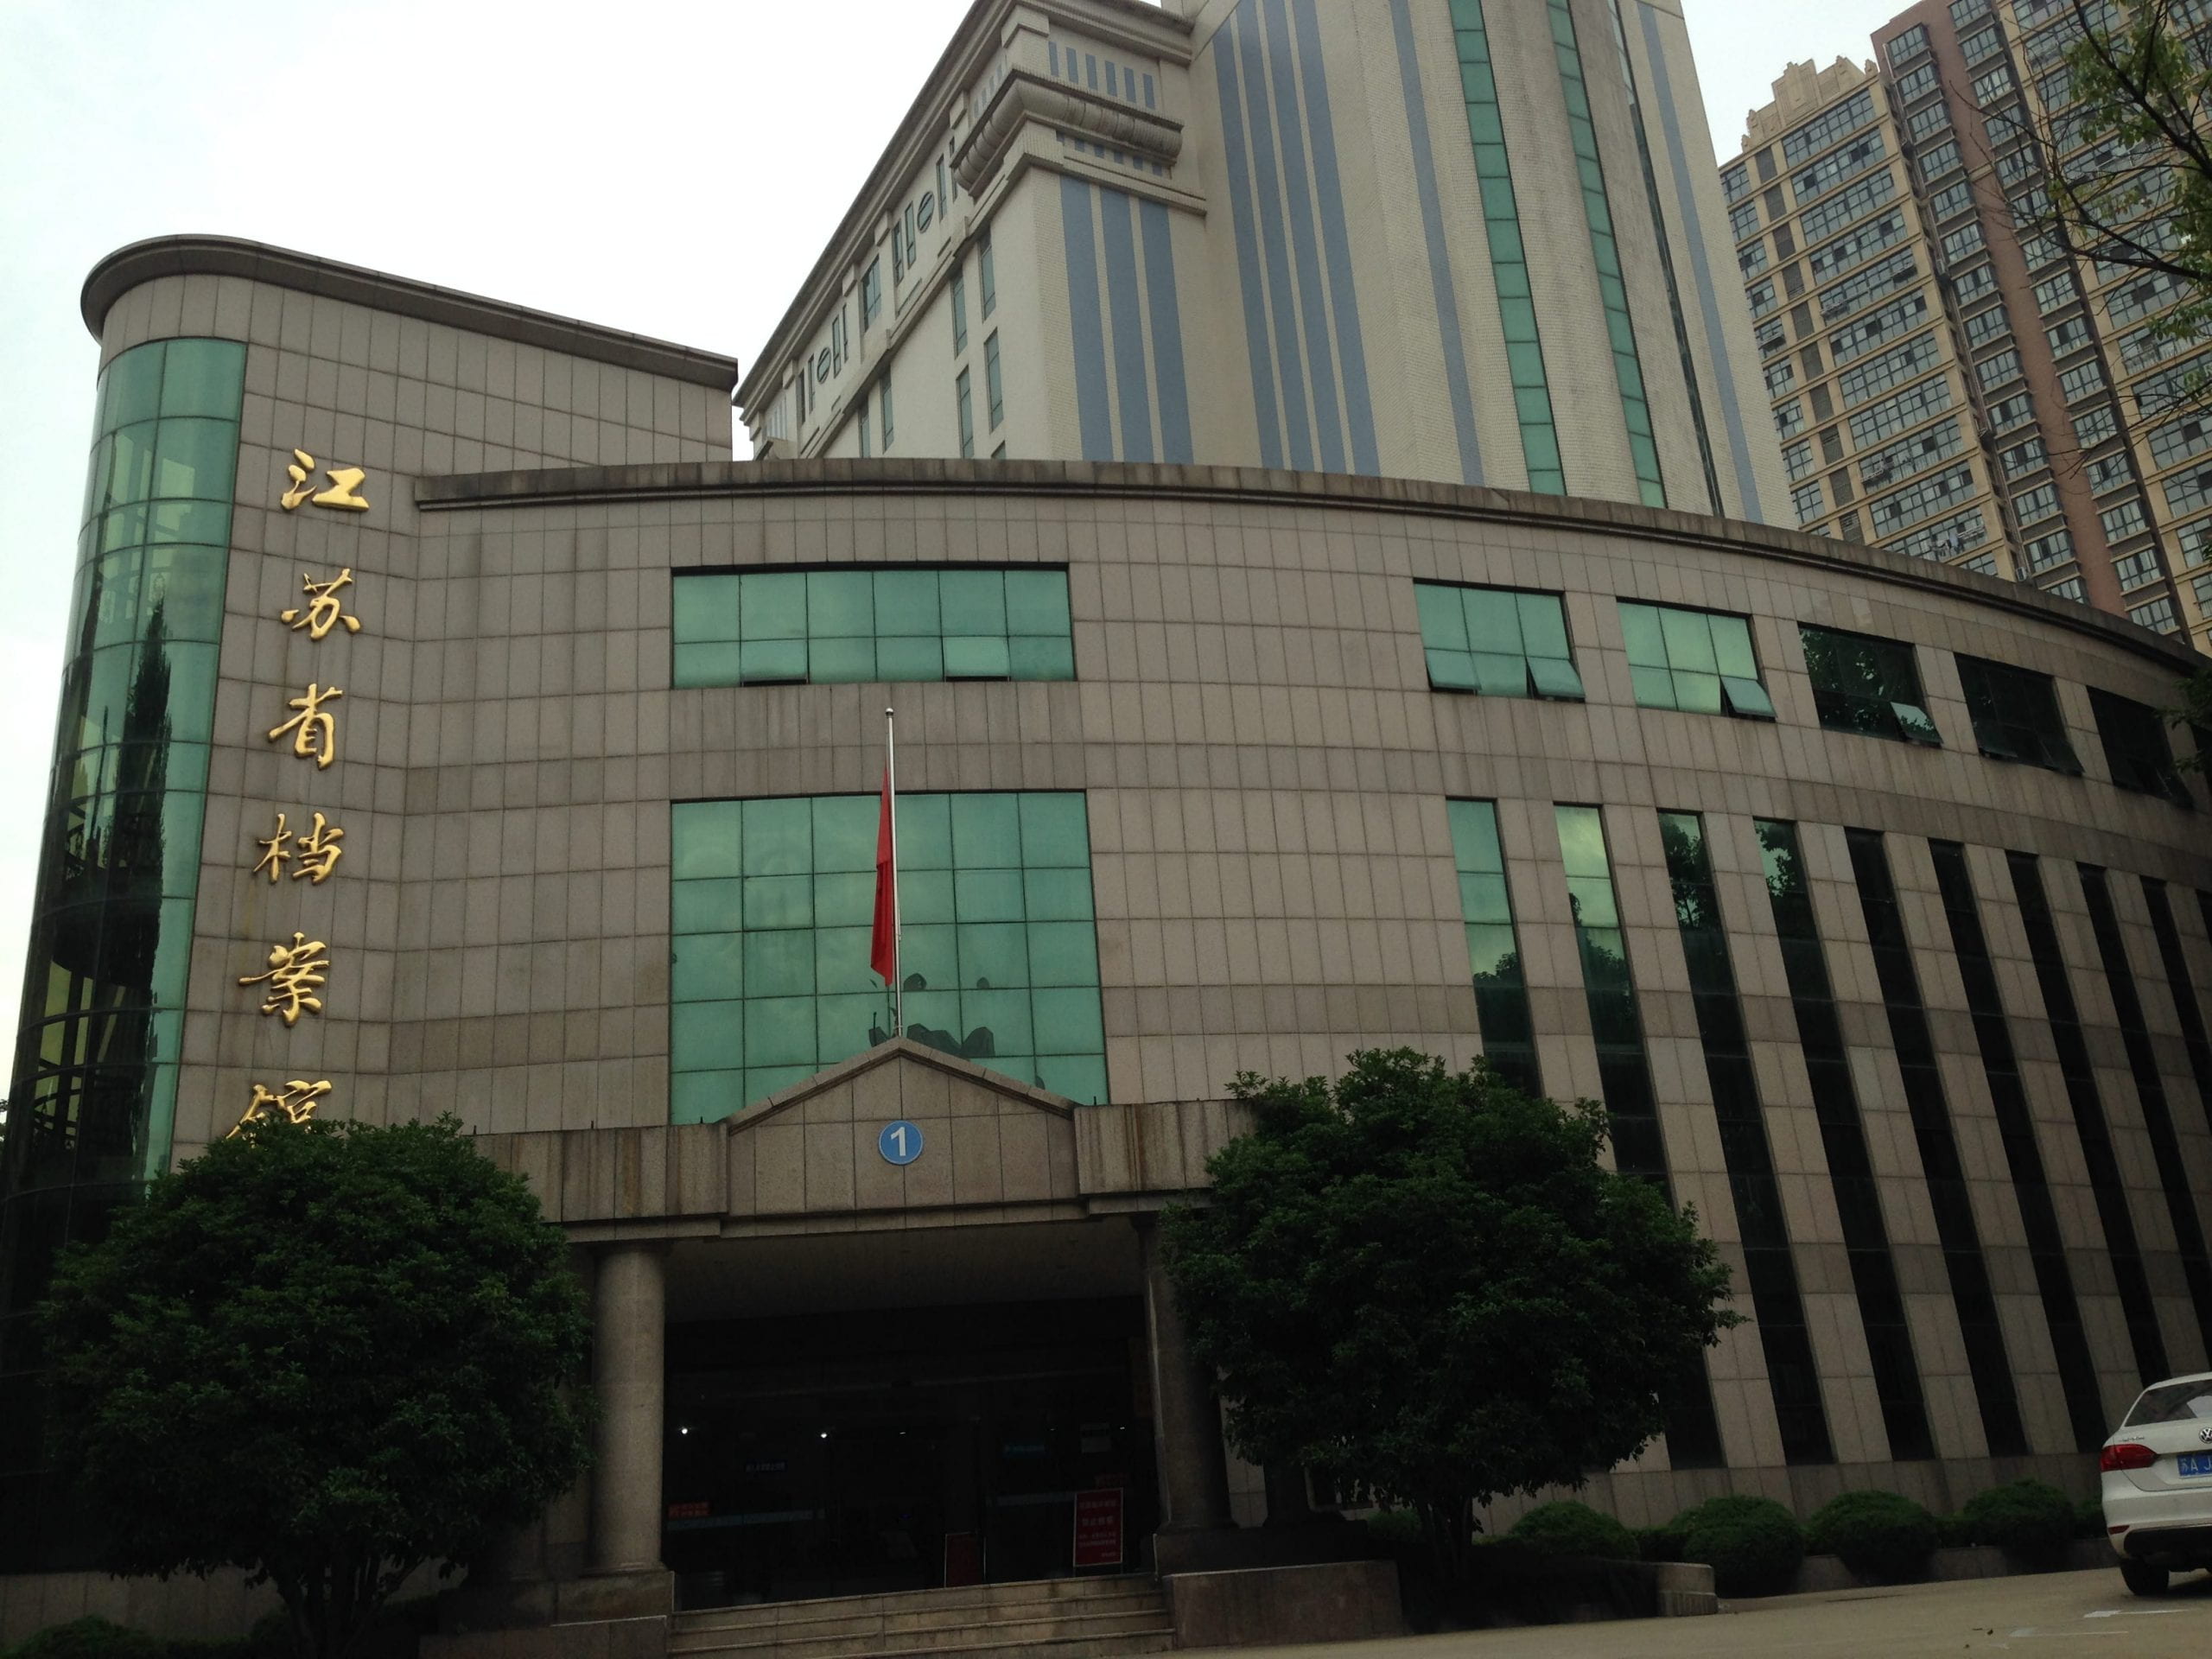 Jiangsu Provincial Archive front of the building